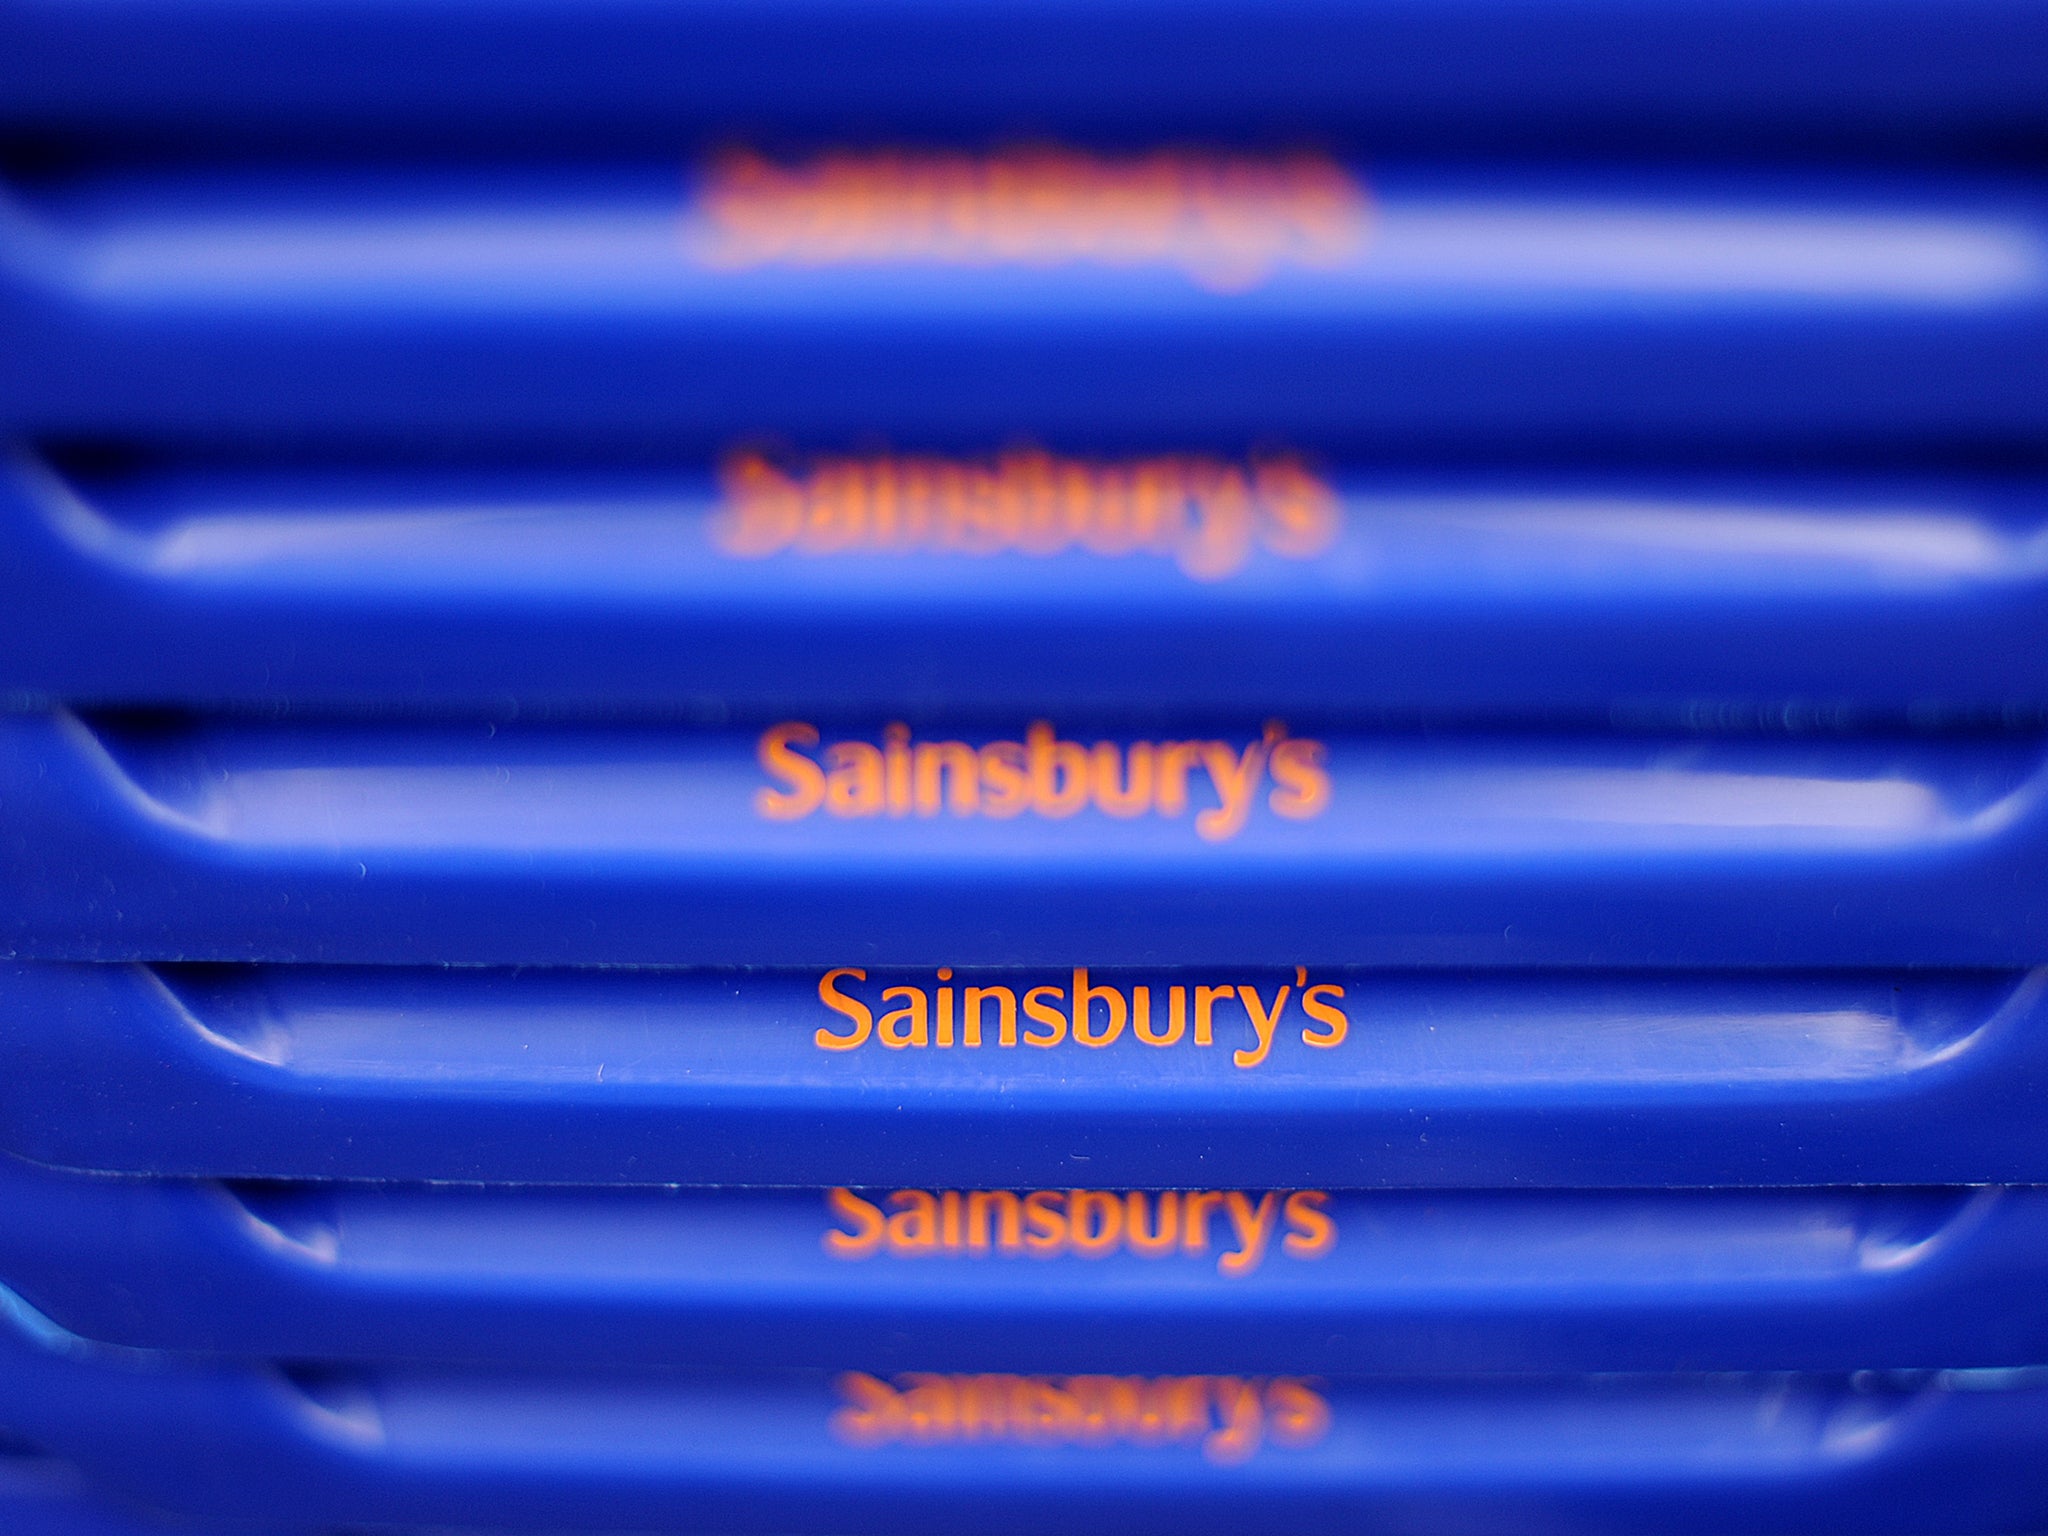 Shopping baskets featuring the Sainsbury's supermarket logo are pictured in London.